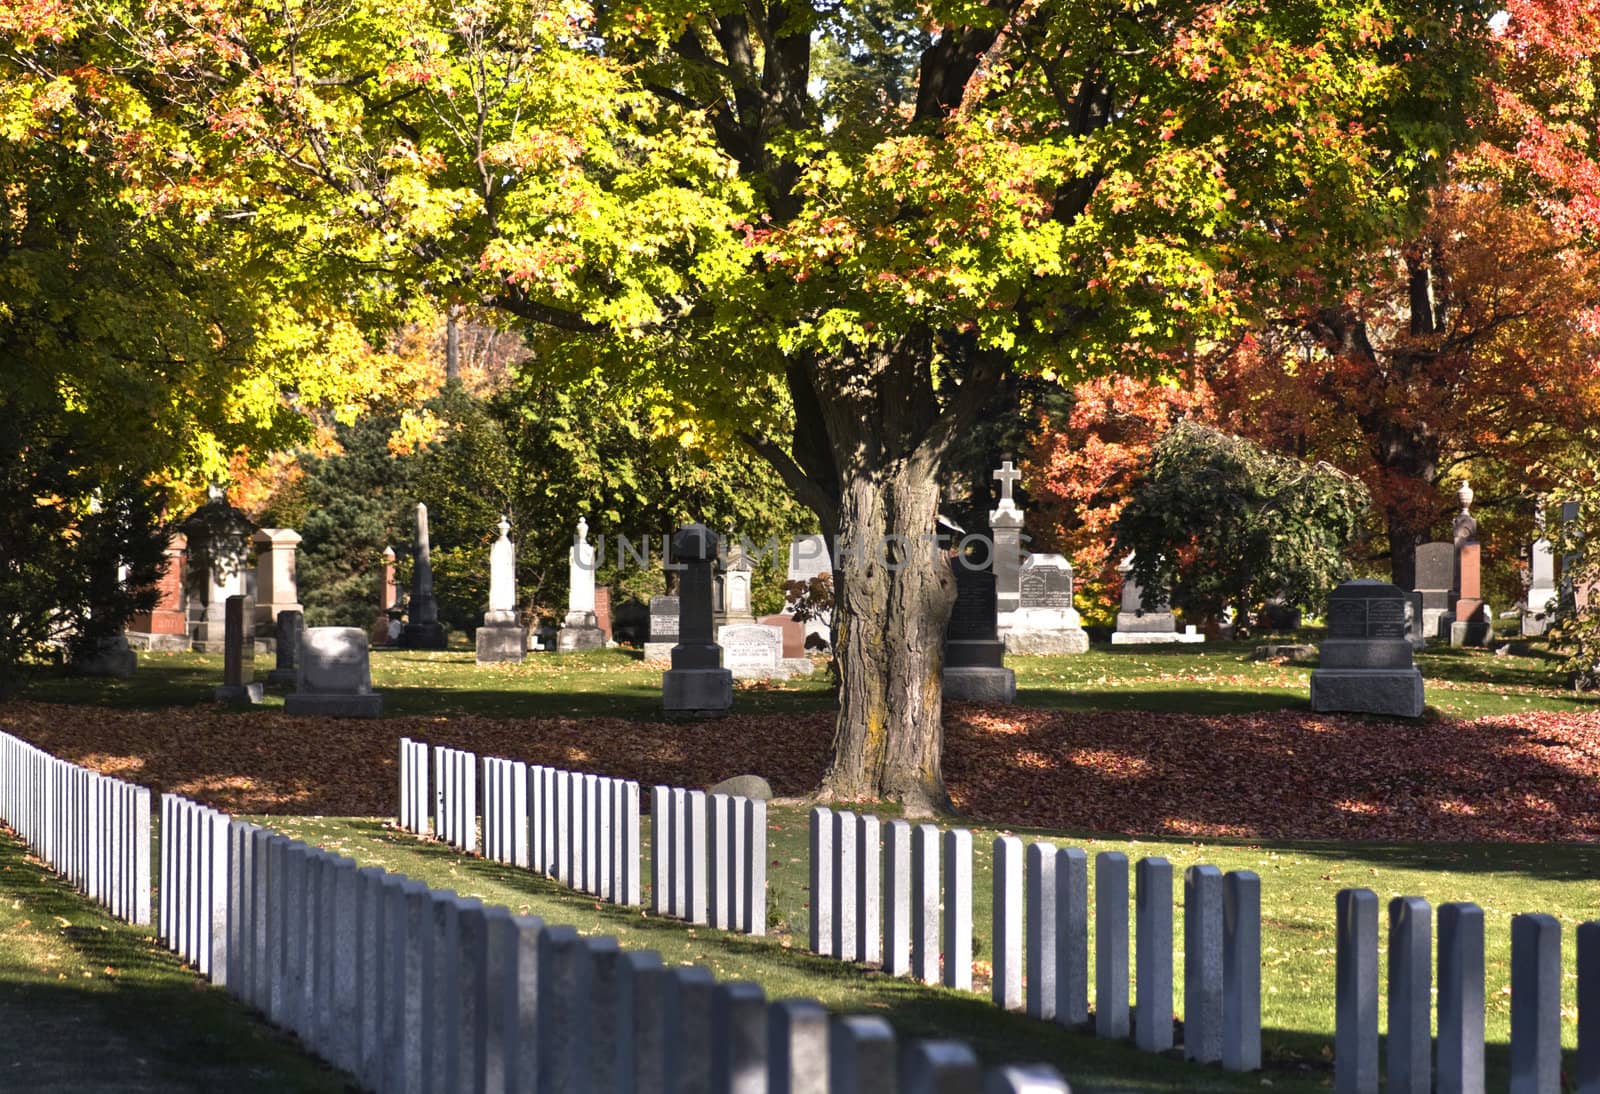 A cemetery showing soldier tombstones under big trees in autumn.